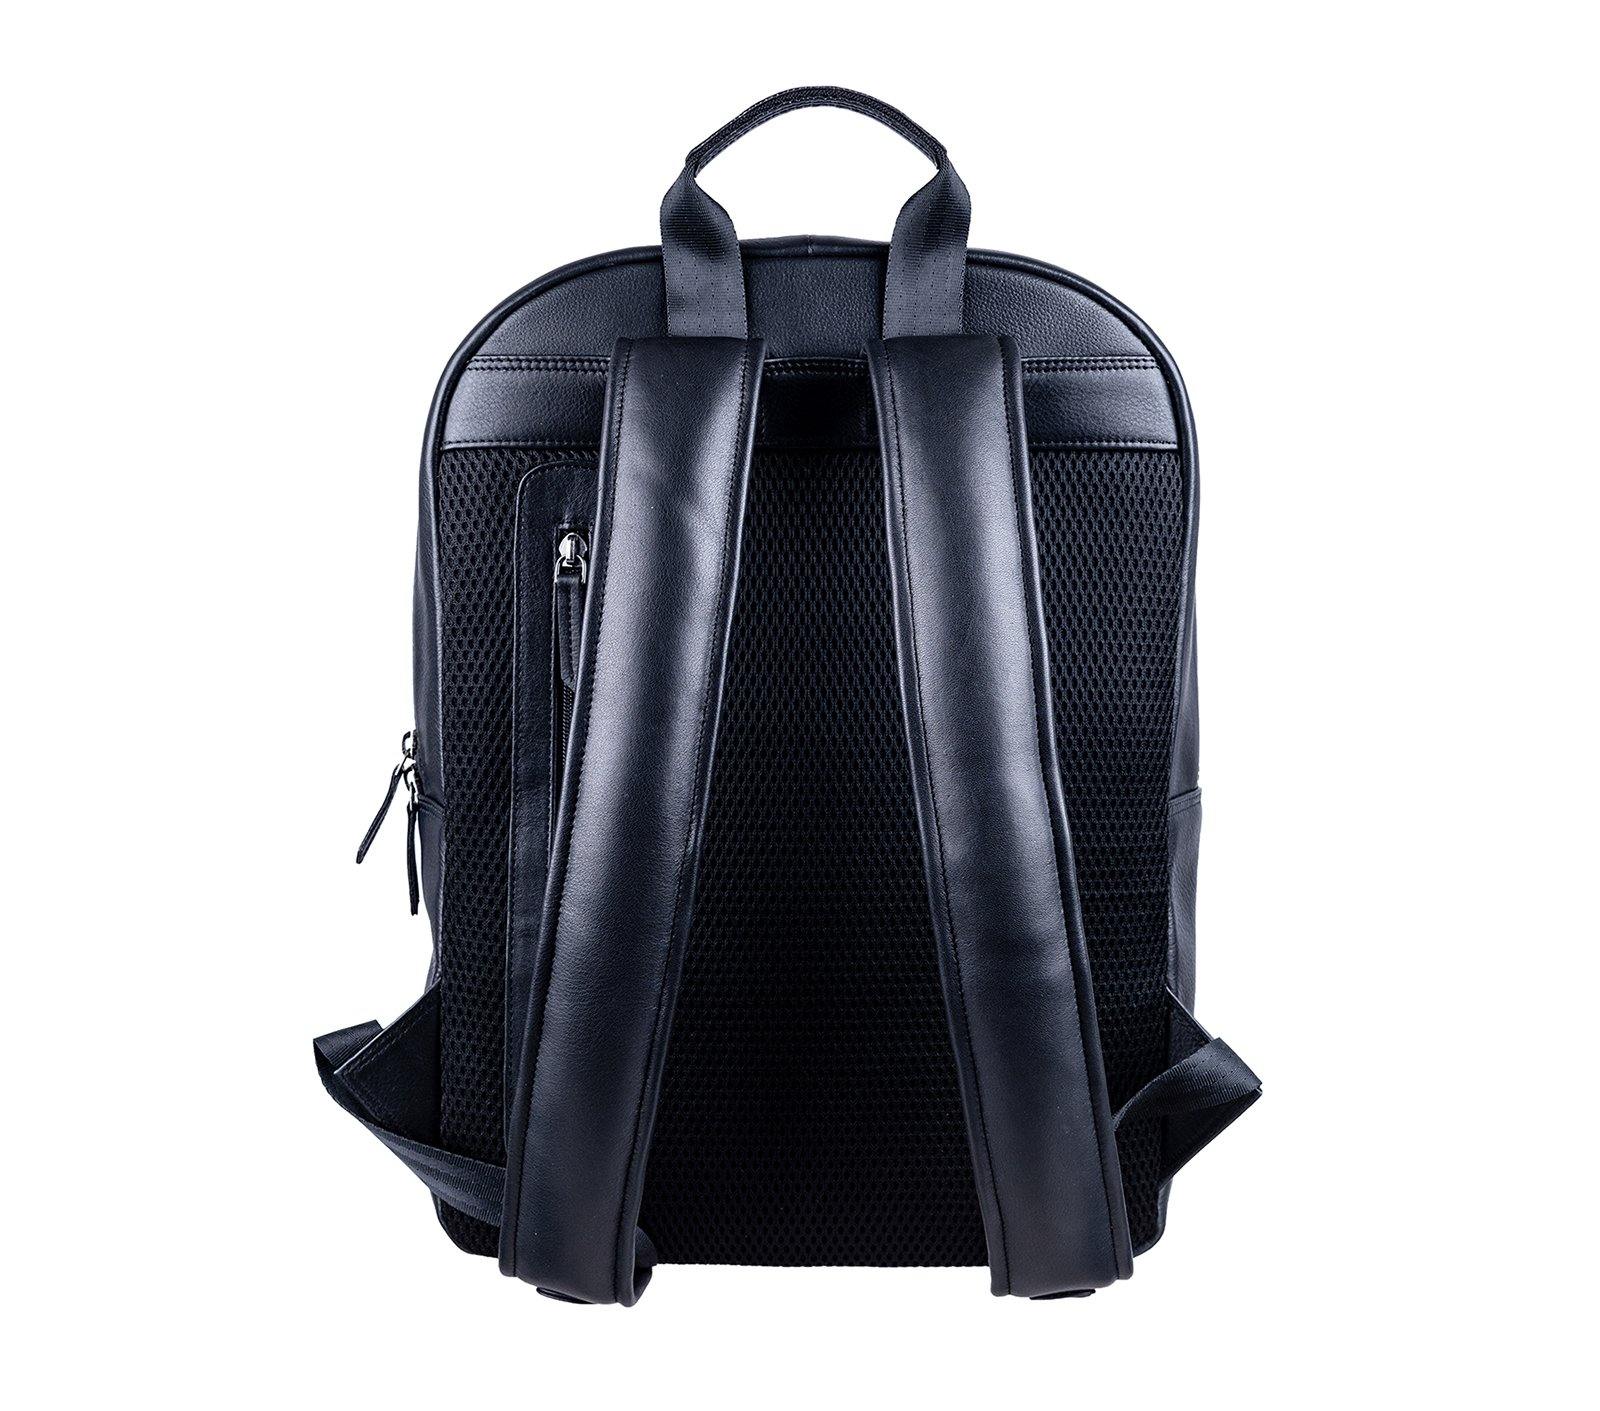 Buy Leather World Laptop Backpack Bag Premium Vegan Leather Office Backpack  Bag with 15.6 Inch Laptop Compartment, for Men Women - Black at Amazon.in